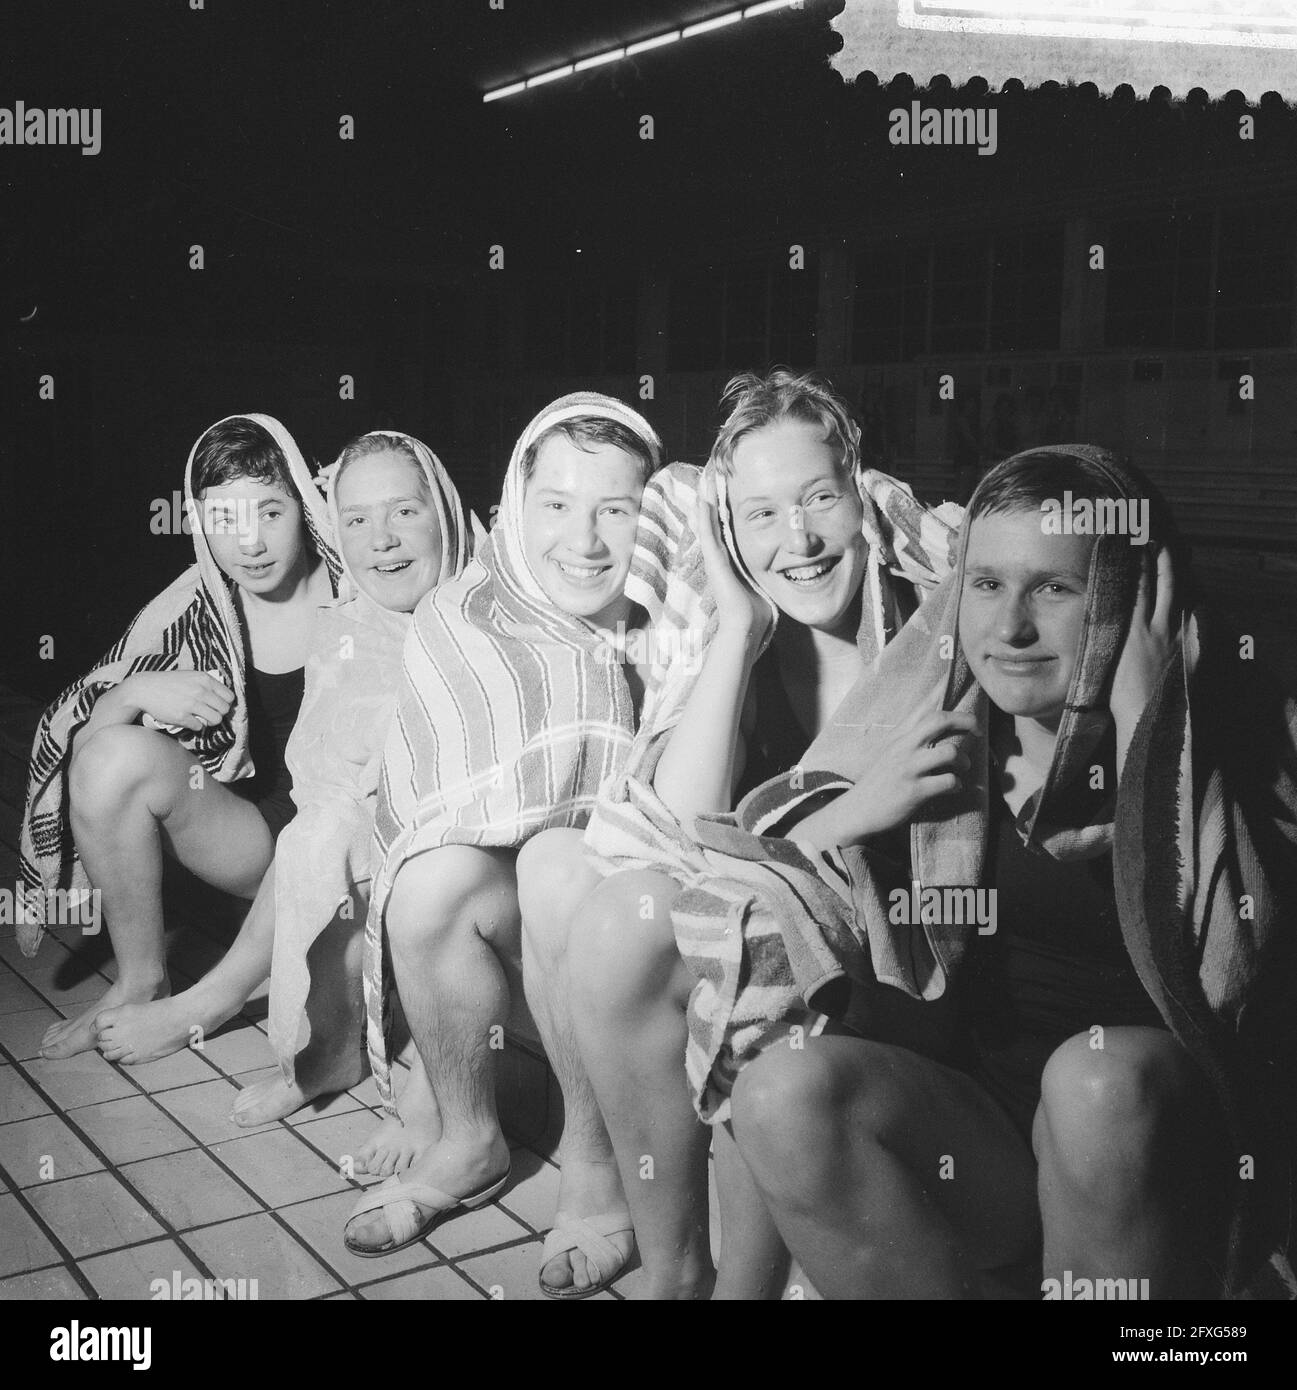 Improvement of two Dutch records by the swimming club Naarden, from left to right Adrie Lasterie, T. Lagerberg, Dini Koopman, Willy Lambour and Marianne Heemskerk, March 10, 1960, swimming clubs, The Netherlands, 20th century press agency photo, news to remember, documentary, historic photography 1945-1990, visual stories, human history of the Twentieth Century, capturing moments in time Stock Photo